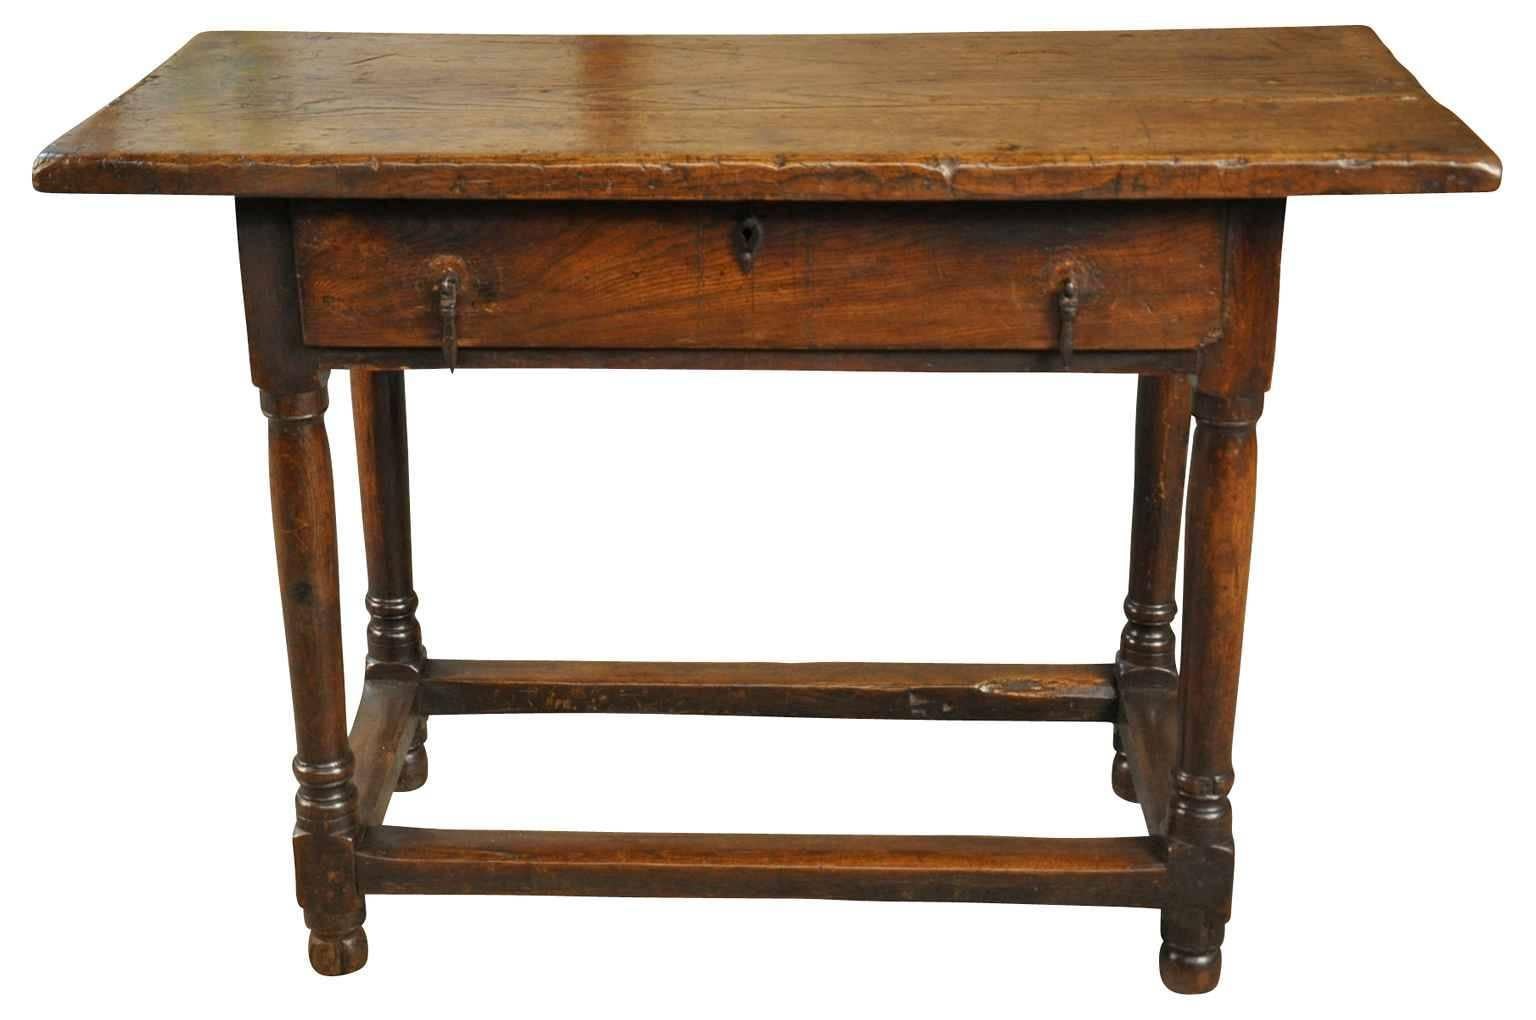 A very charming early 19th century Primitive French side table - console. Wonderfully constructed from chestnut with a solid board top, single drawer and nicely turned legs. A terrific occasional piece. Rich and luminous patina.